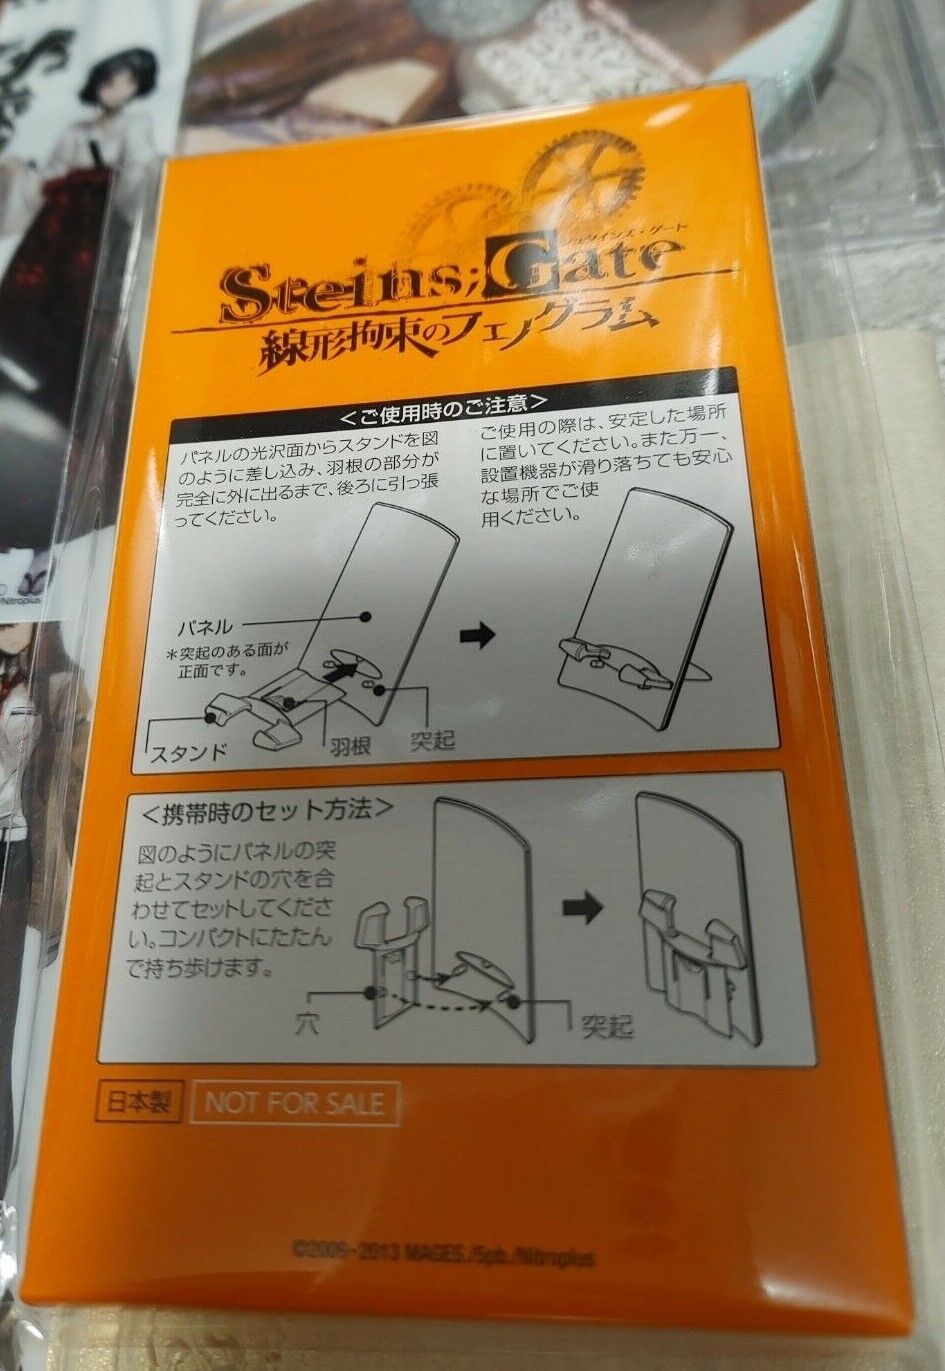 Steins Gate Limited Edition Keitai Stand Japan Limited